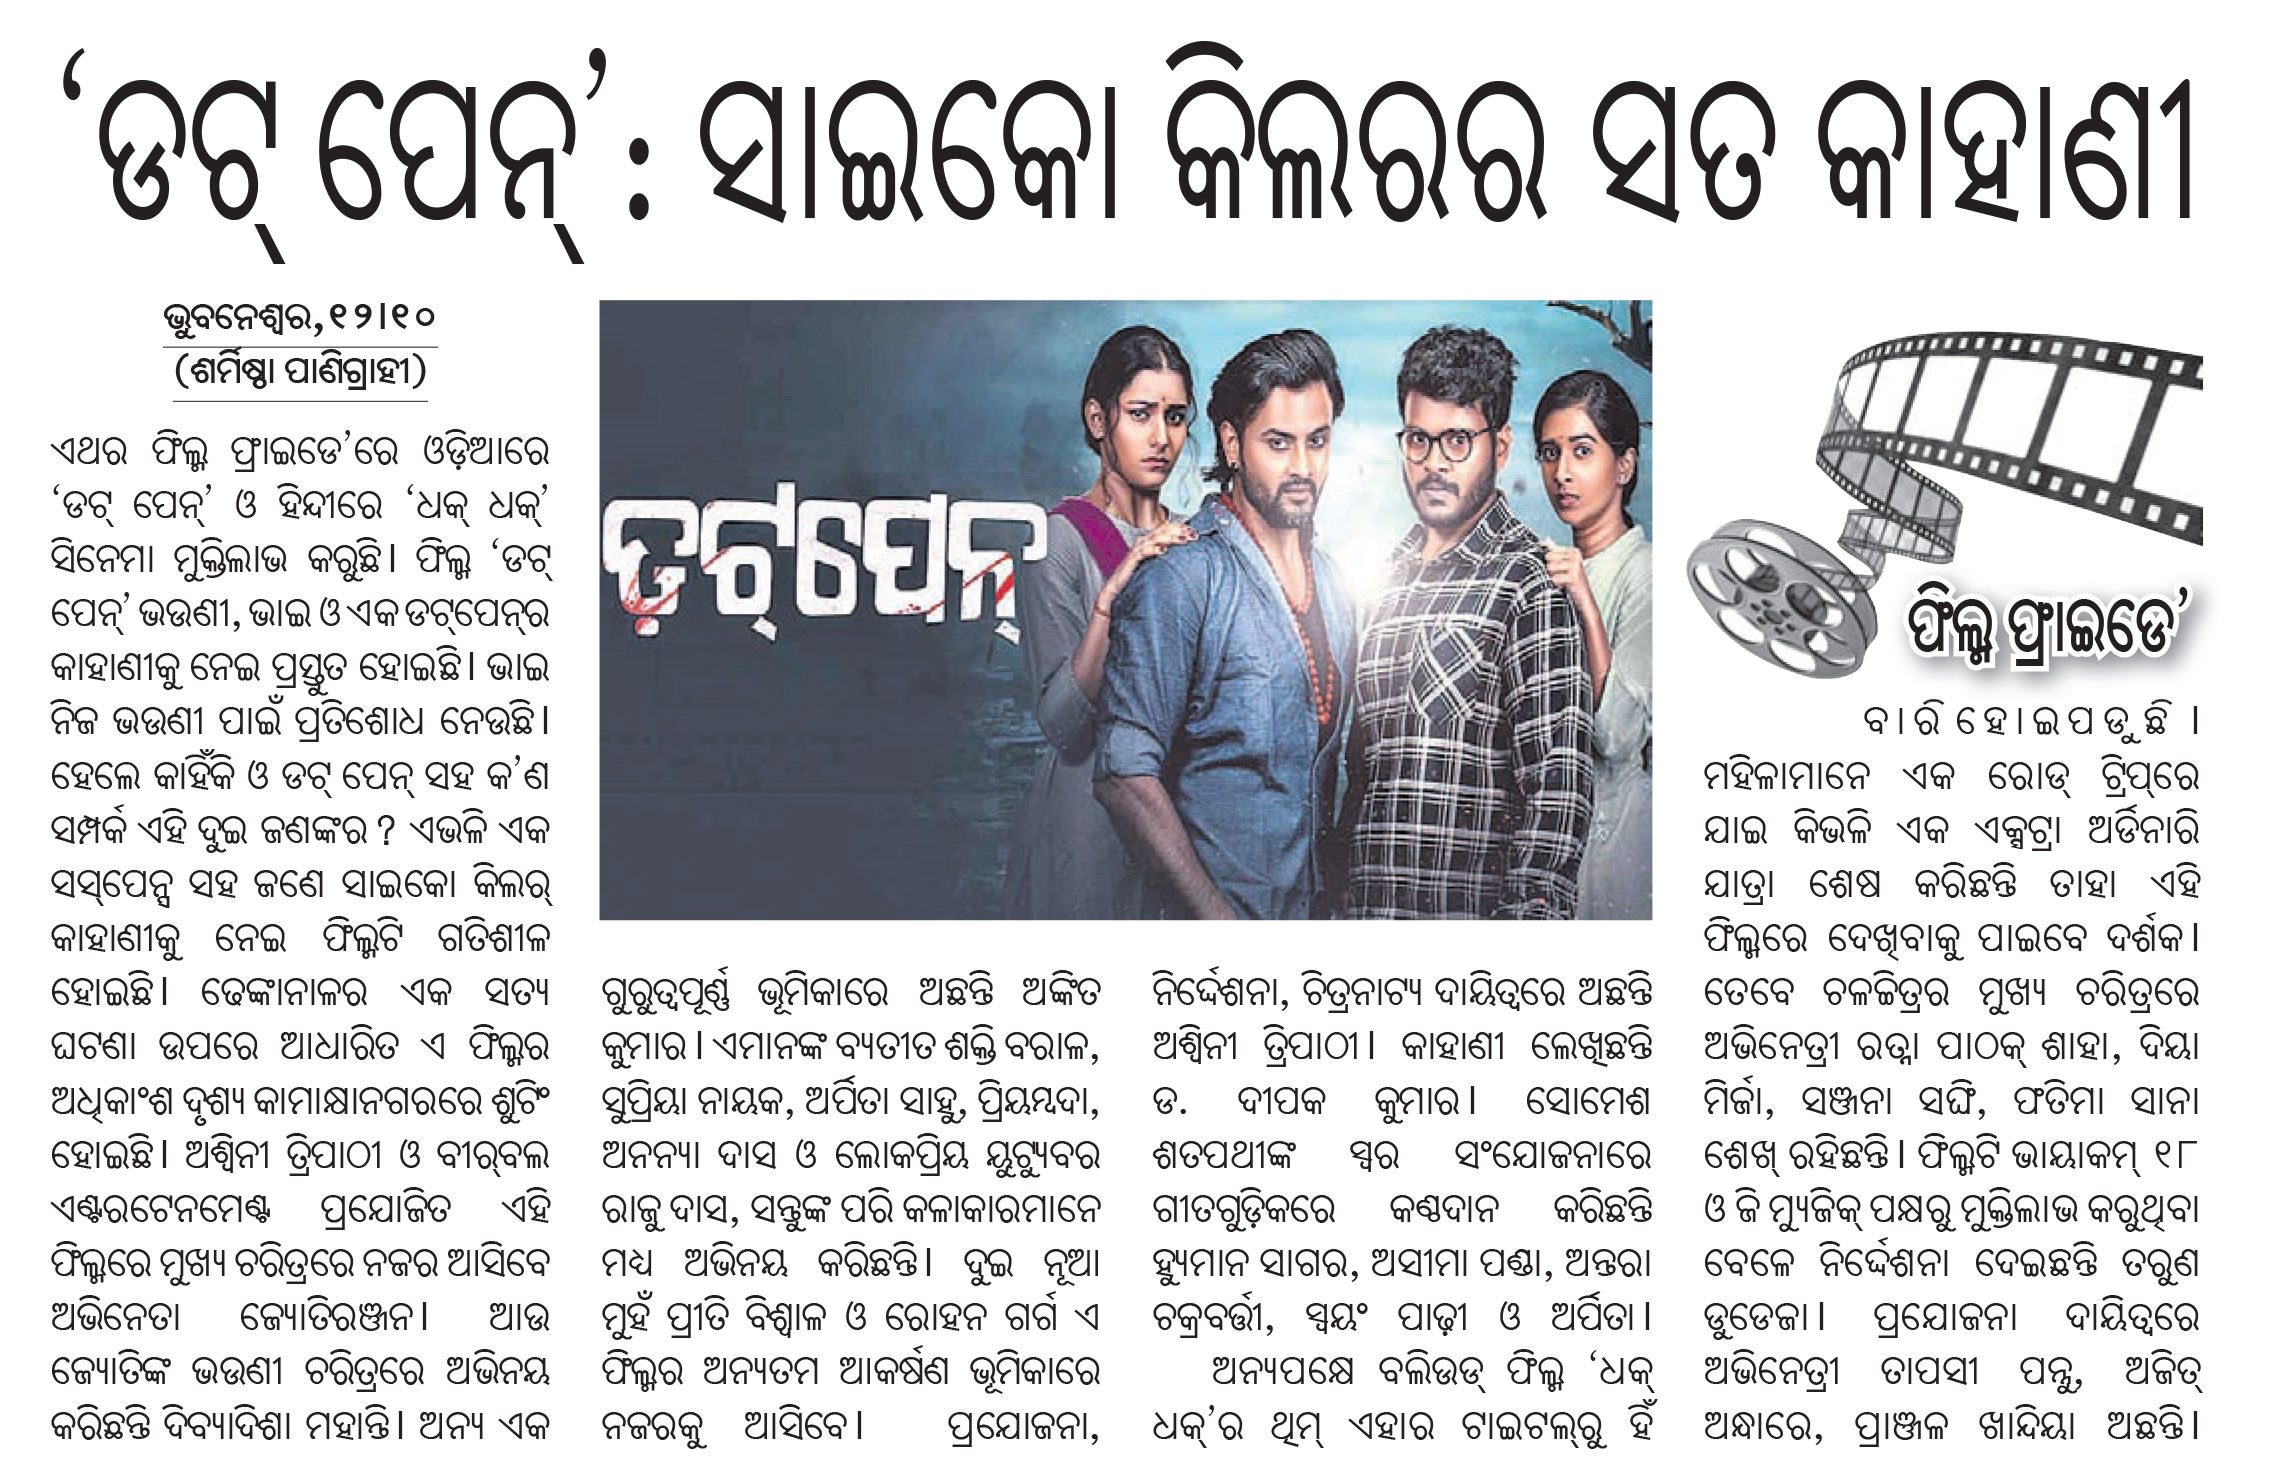 'Dotpen' release news in Dharitri 13 Oct. 2023